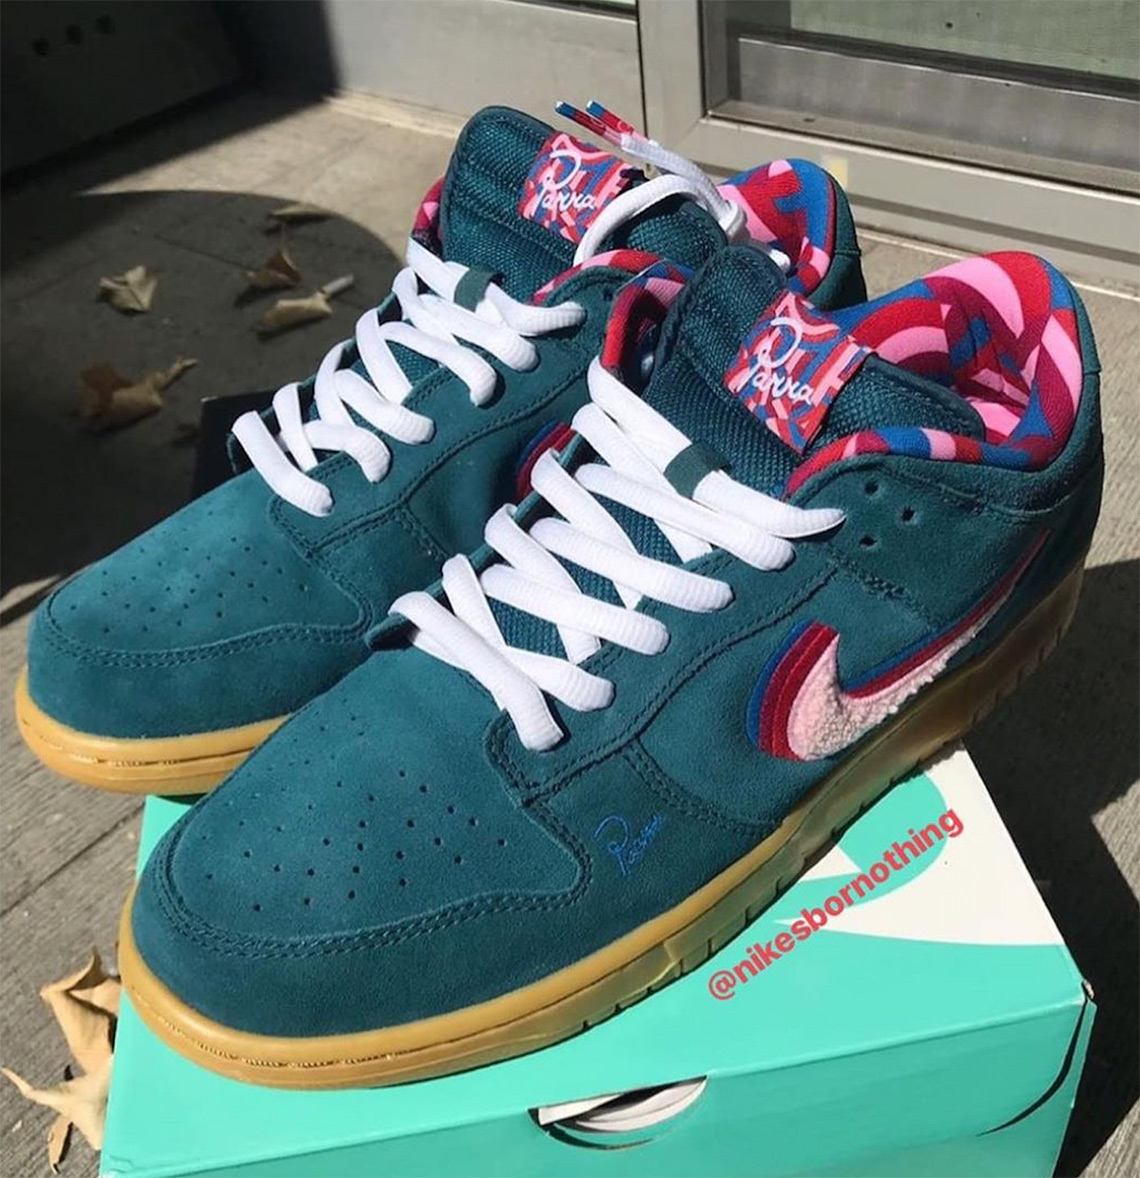 Parra Nike Essentional Sb Dunk Friends And Family Teal 1